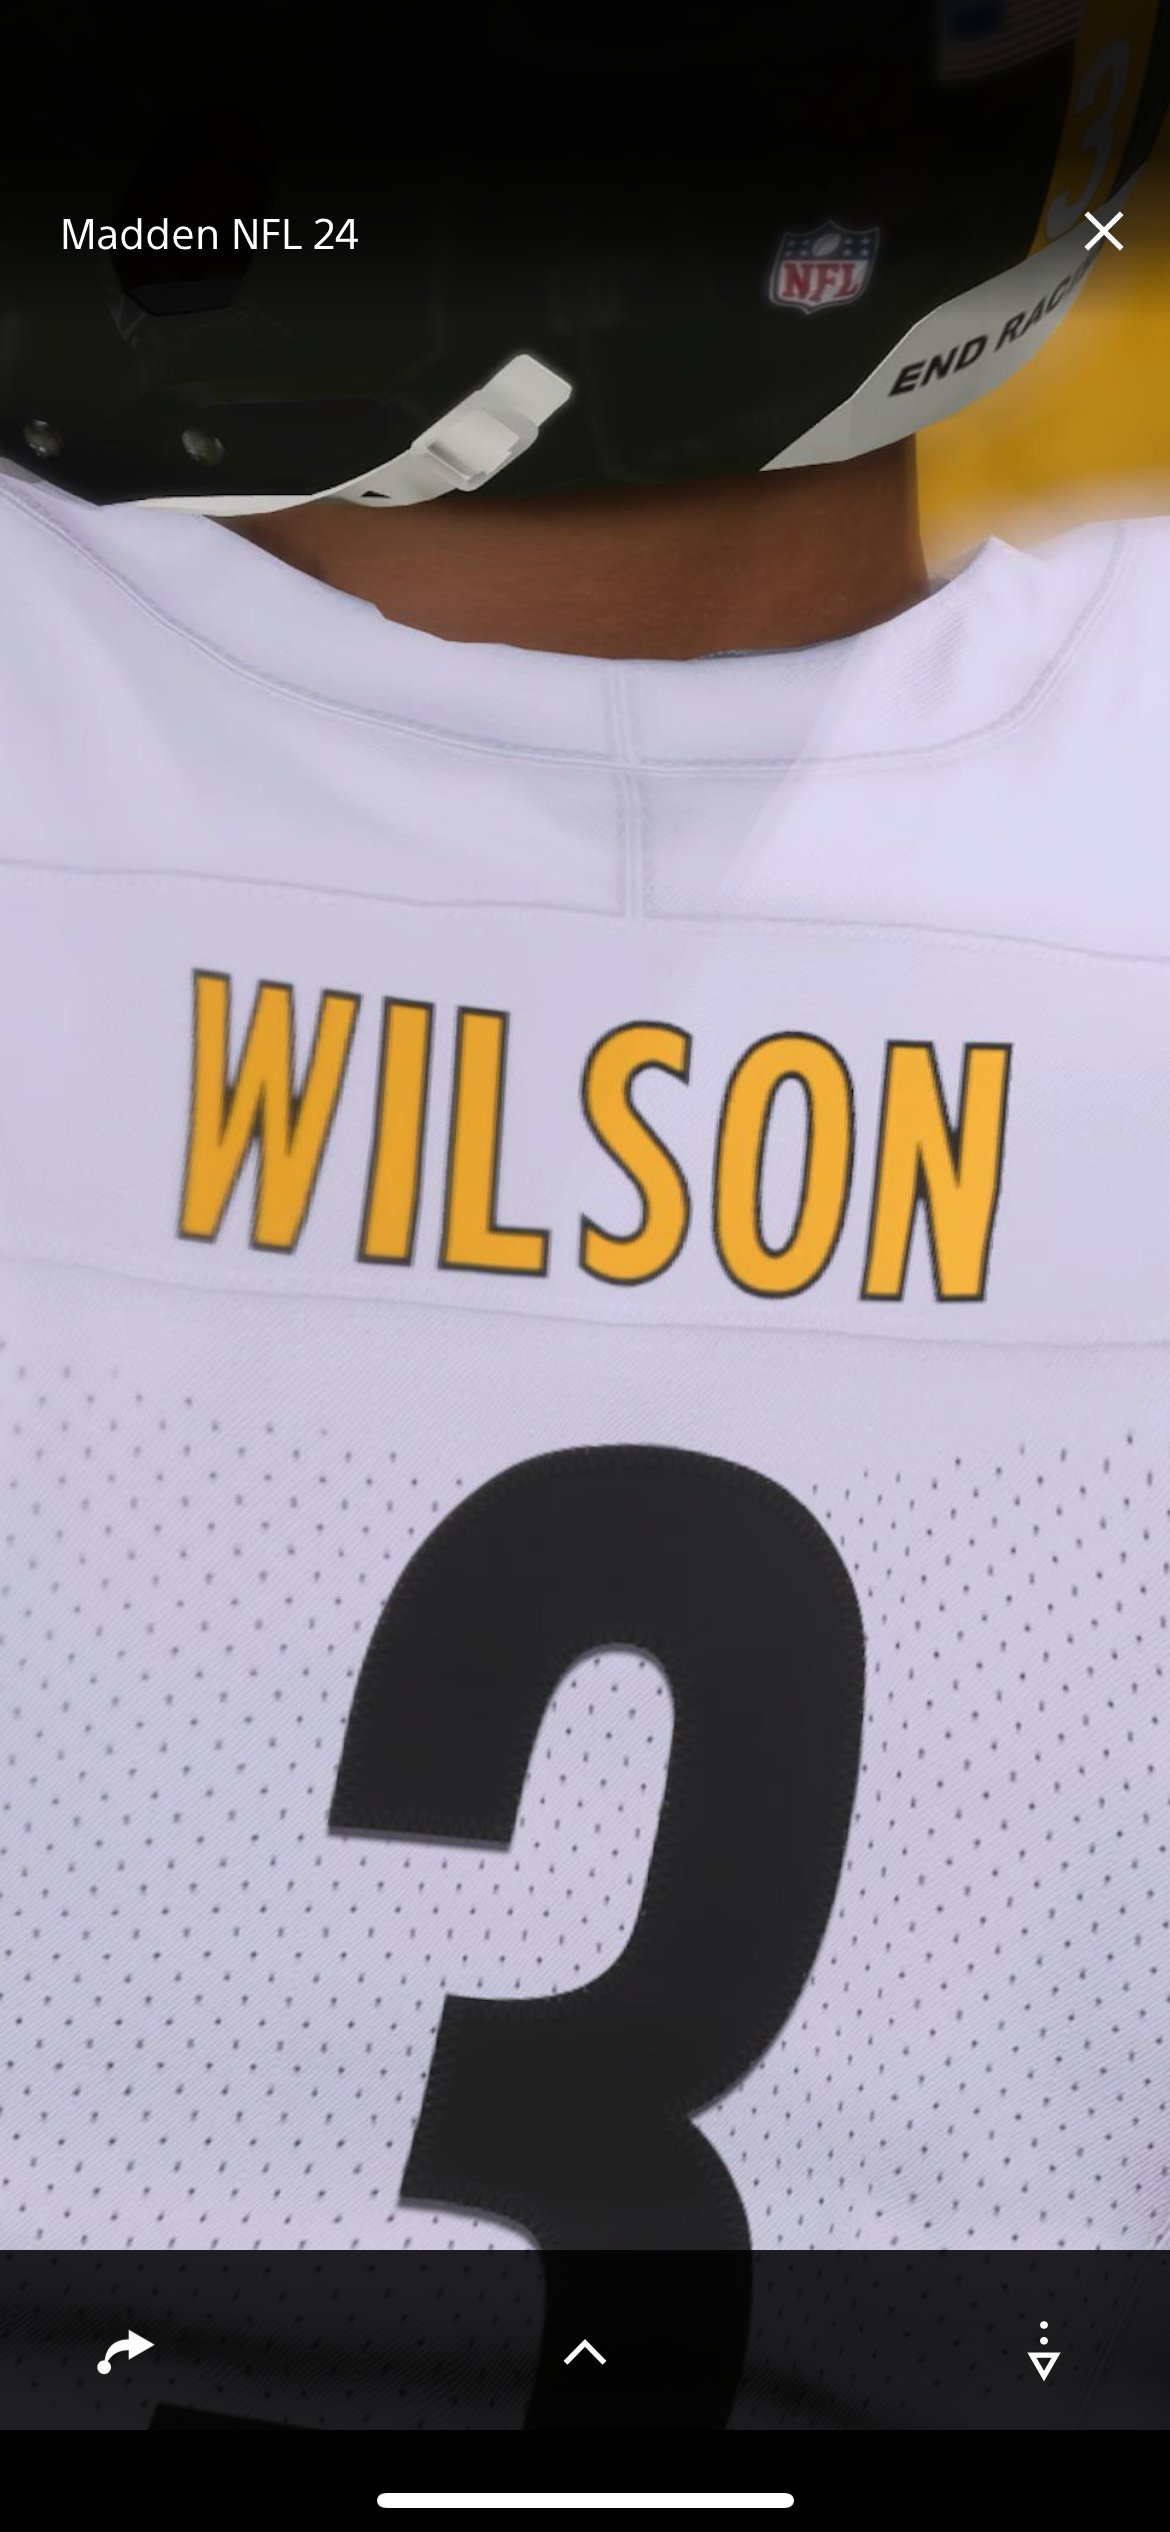 Russell Wilson Pittsburgh Steelers 2024/25 NFL F.U.S.E Style Nike Vapor Limited Away Jersey - White